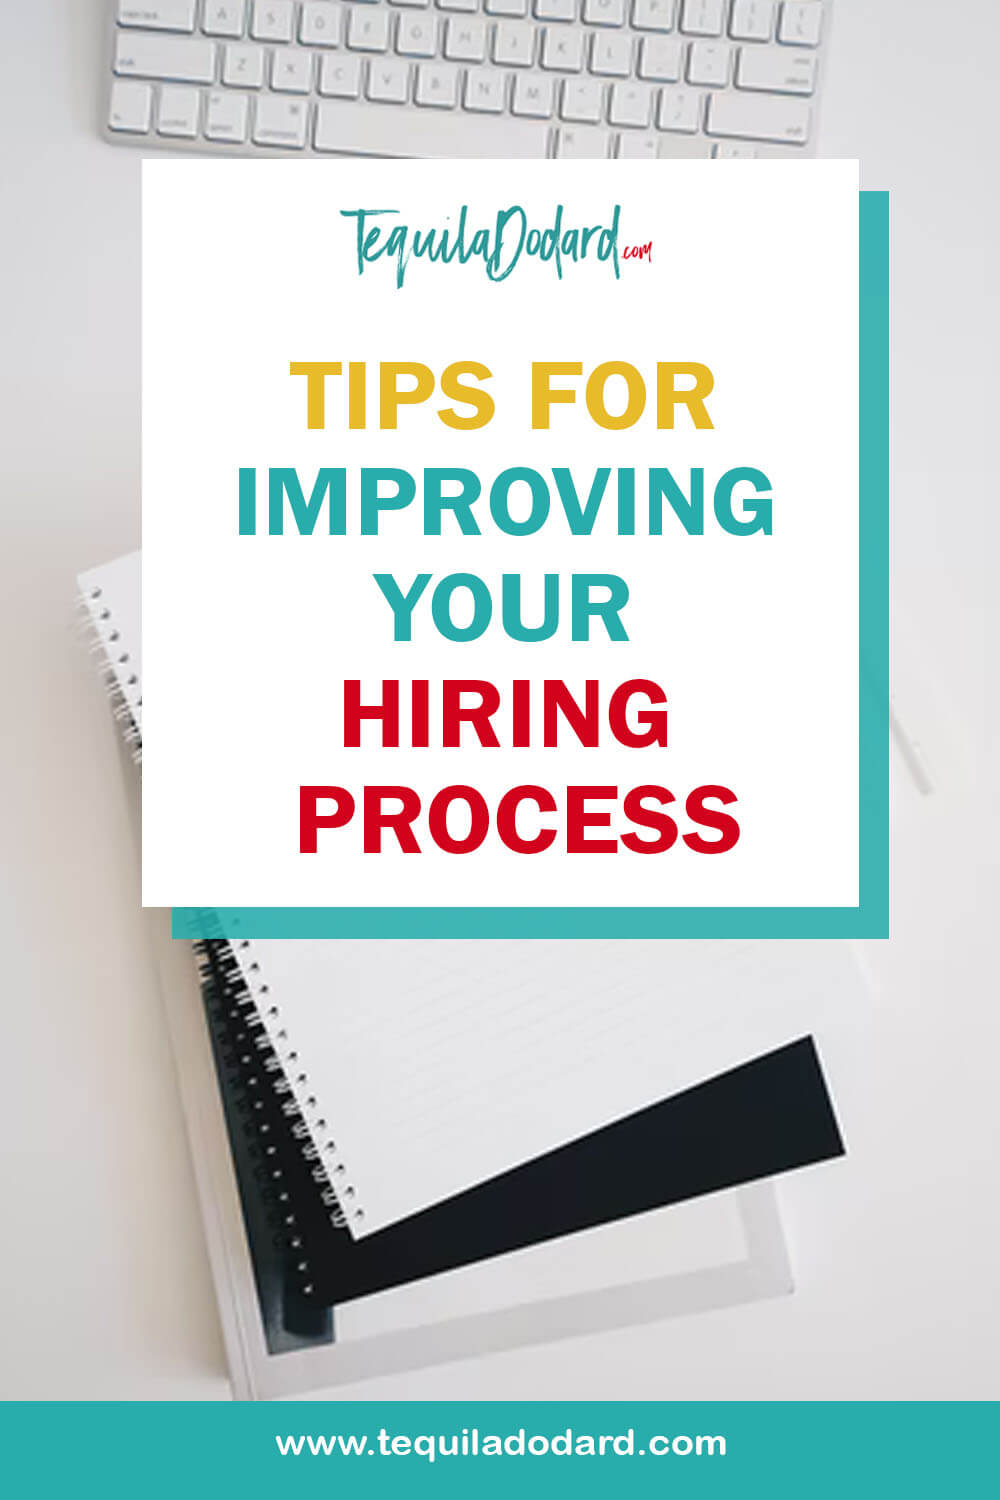 Tips-for-improving-your-hiring-process